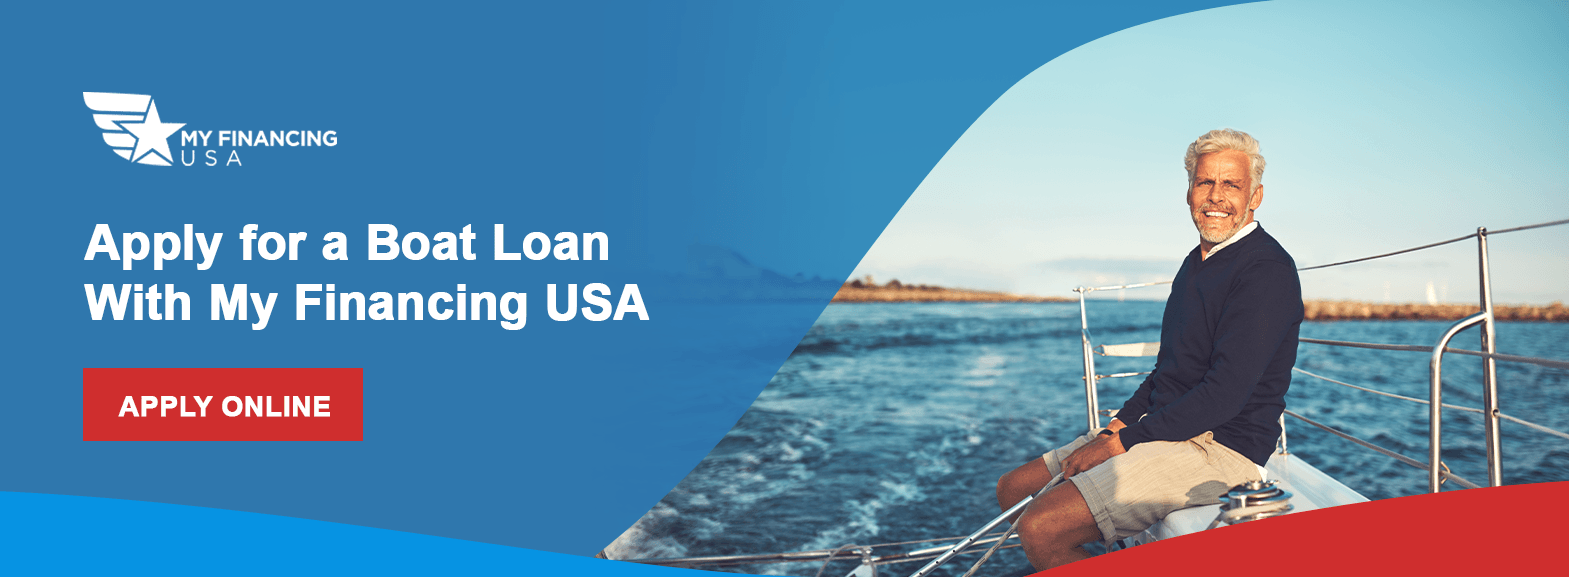 Apply for a Boat Loan With My Financing USA. Apply online!